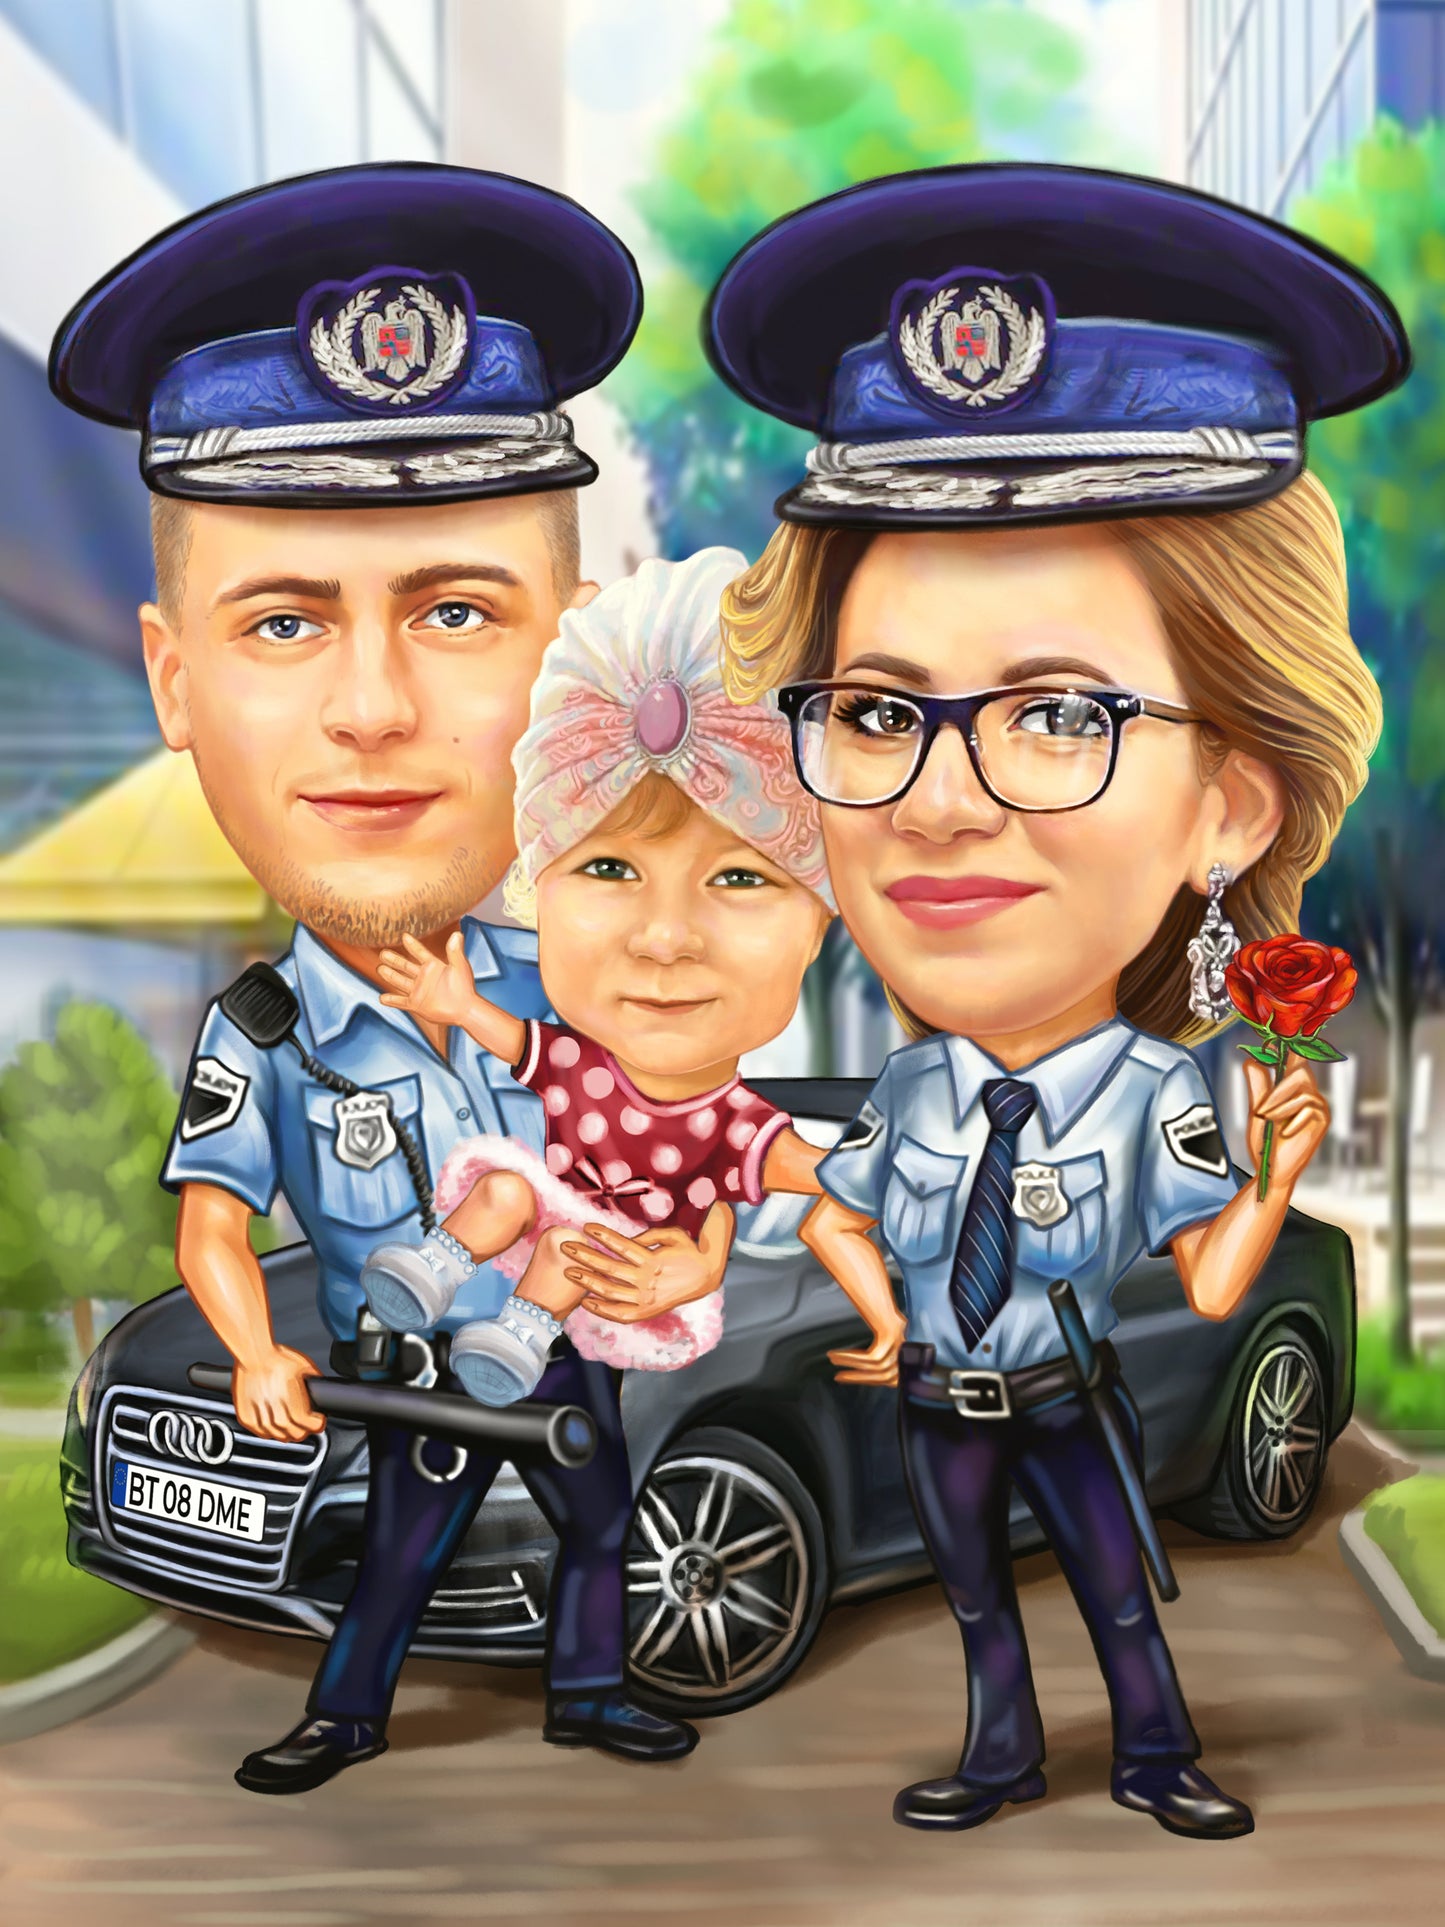 Police family with a baby caricature